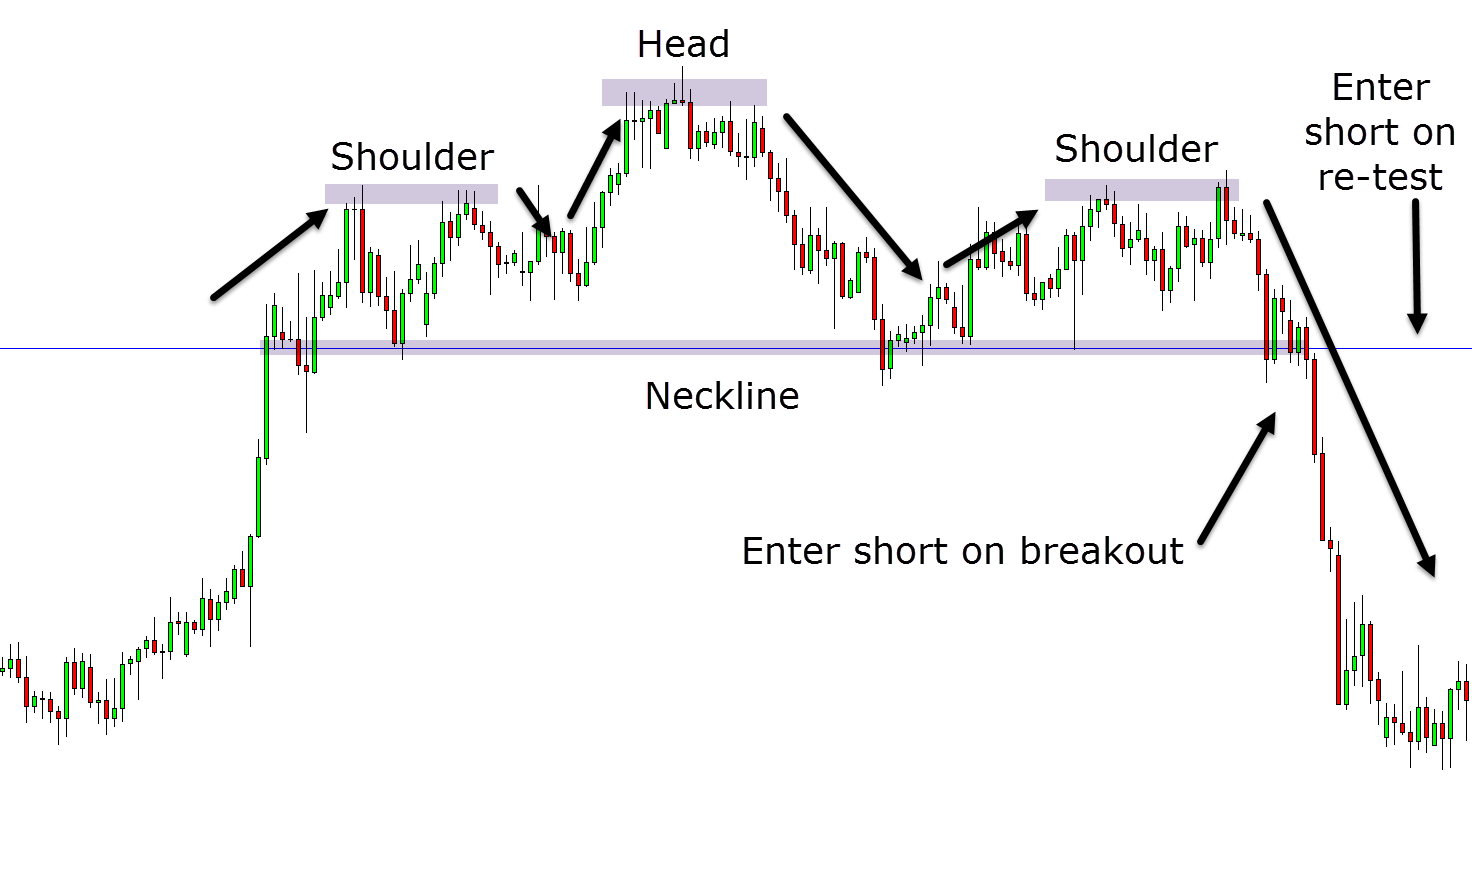 How to trade the Head and shoulders pattern